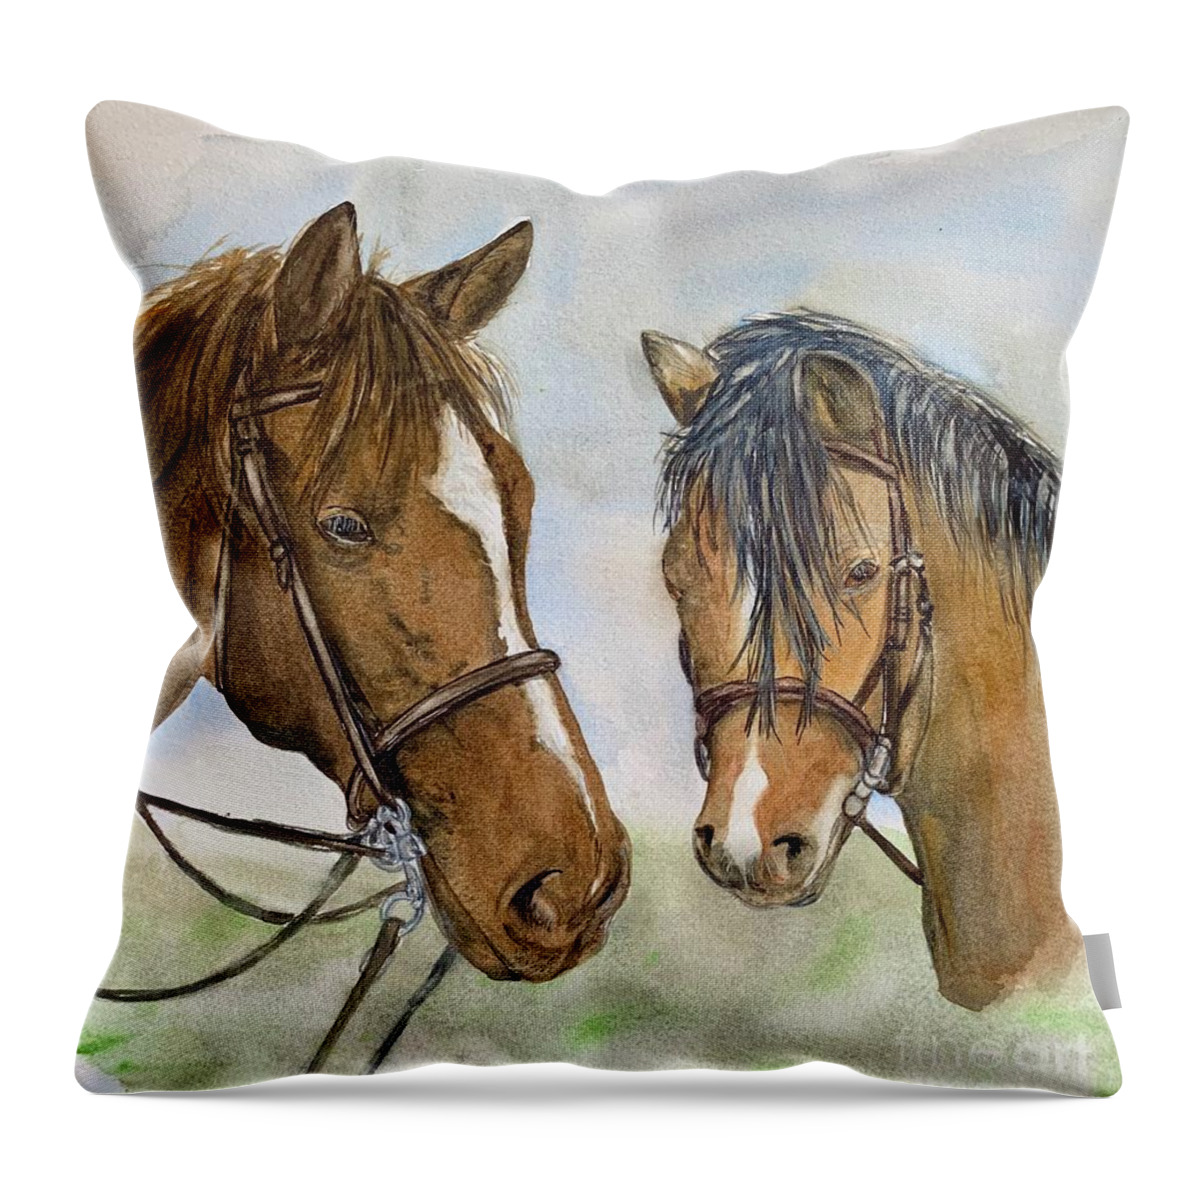 Horse Throw Pillow featuring the painting Ponies by Diane Ziemski